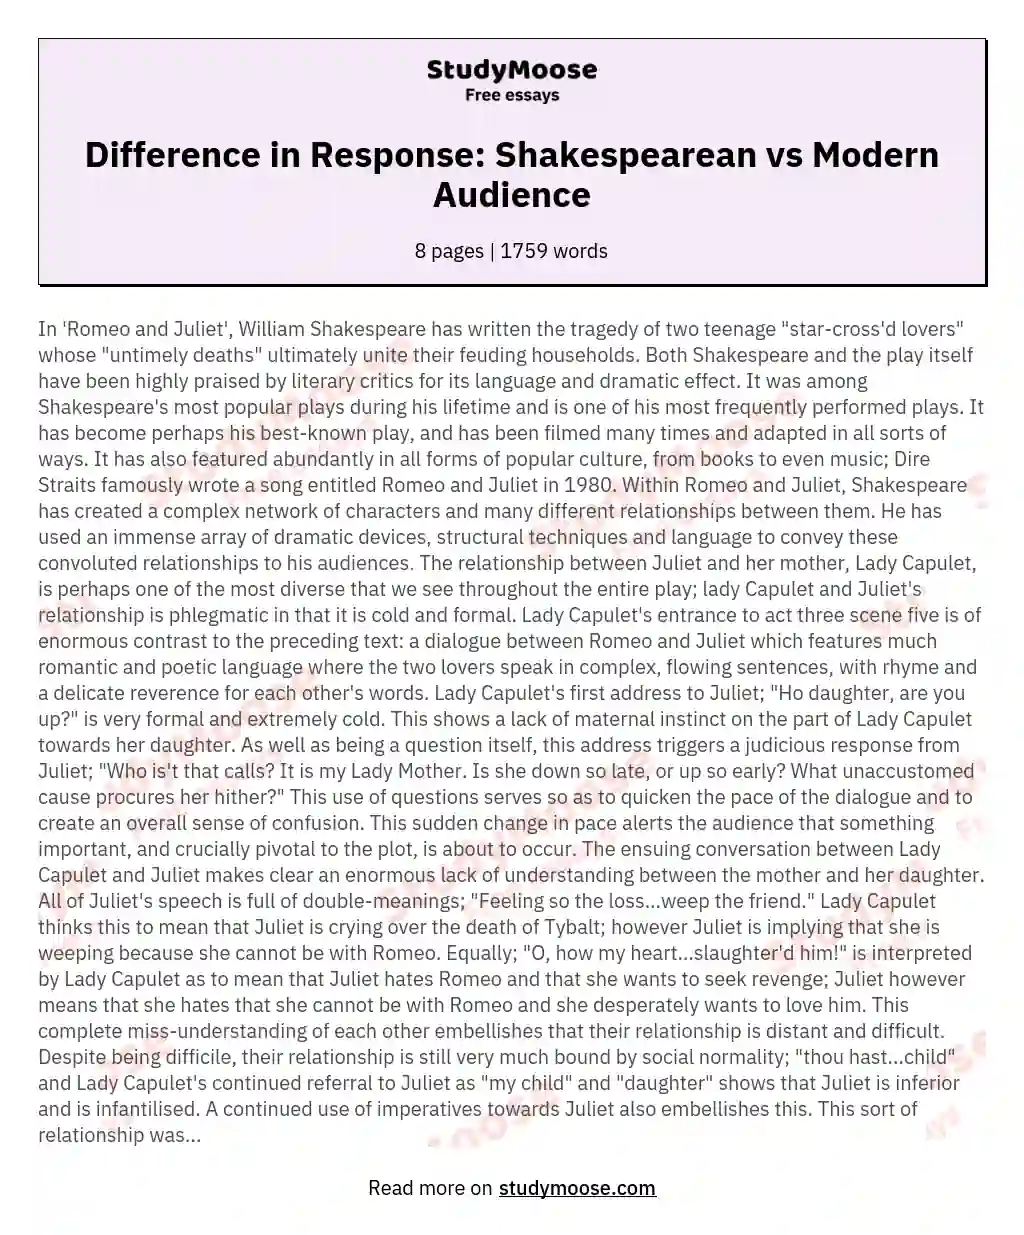 Difference in Response: Shakespearean vs Modern Audience essay